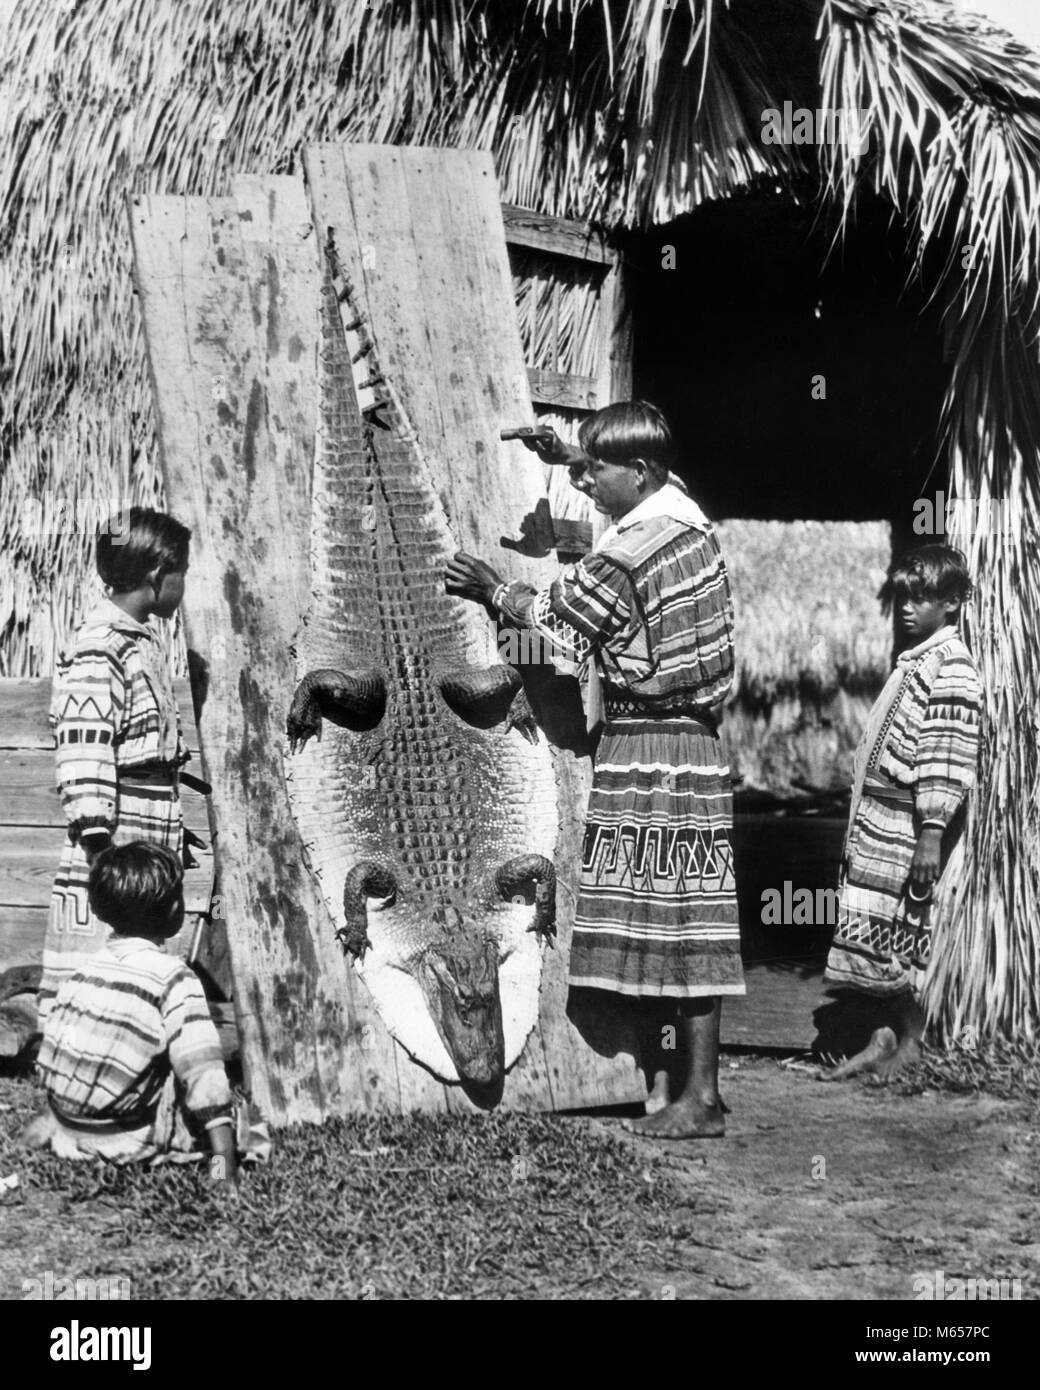 1920s 1930s SEMINOLE NATIVE AMERICAN INDIAN MAN FATHER SHOWING BOYS SONS HOW TO STRETCH AND TAN ALLIGATOR SKIN HIDE FLORIDA USA - i252 HAR001 HARS RURAL HOME LIFE COPY SPACE FRIENDSHIP HALF-LENGTH INDIANS UNITED STATES OF AMERICA HUNTER STRETCH SIBLINGS SKIN NOSTALGIA NORTH AMERICA TOGETHERNESS 10-12 YEARS 25-30 YEARS 30-35 YEARS 7-9 YEARS GOALS NORTH AMERICAN ONE ANIMAL ADVENTURE HIDE HOW KNOWLEDGE PATCHWORK PRIDE SIBLING NATIVE AMERICAN SMALL GROUP OF PEOPLE JUVENILES MALES MID-ADULT MID-ADULT MAN NATIVE AMERICANS SEMINOLE ALLIGATOR MISSISSIPIENSIS B&W BLACK AND WHITE INDIGENOUS Stock Photo